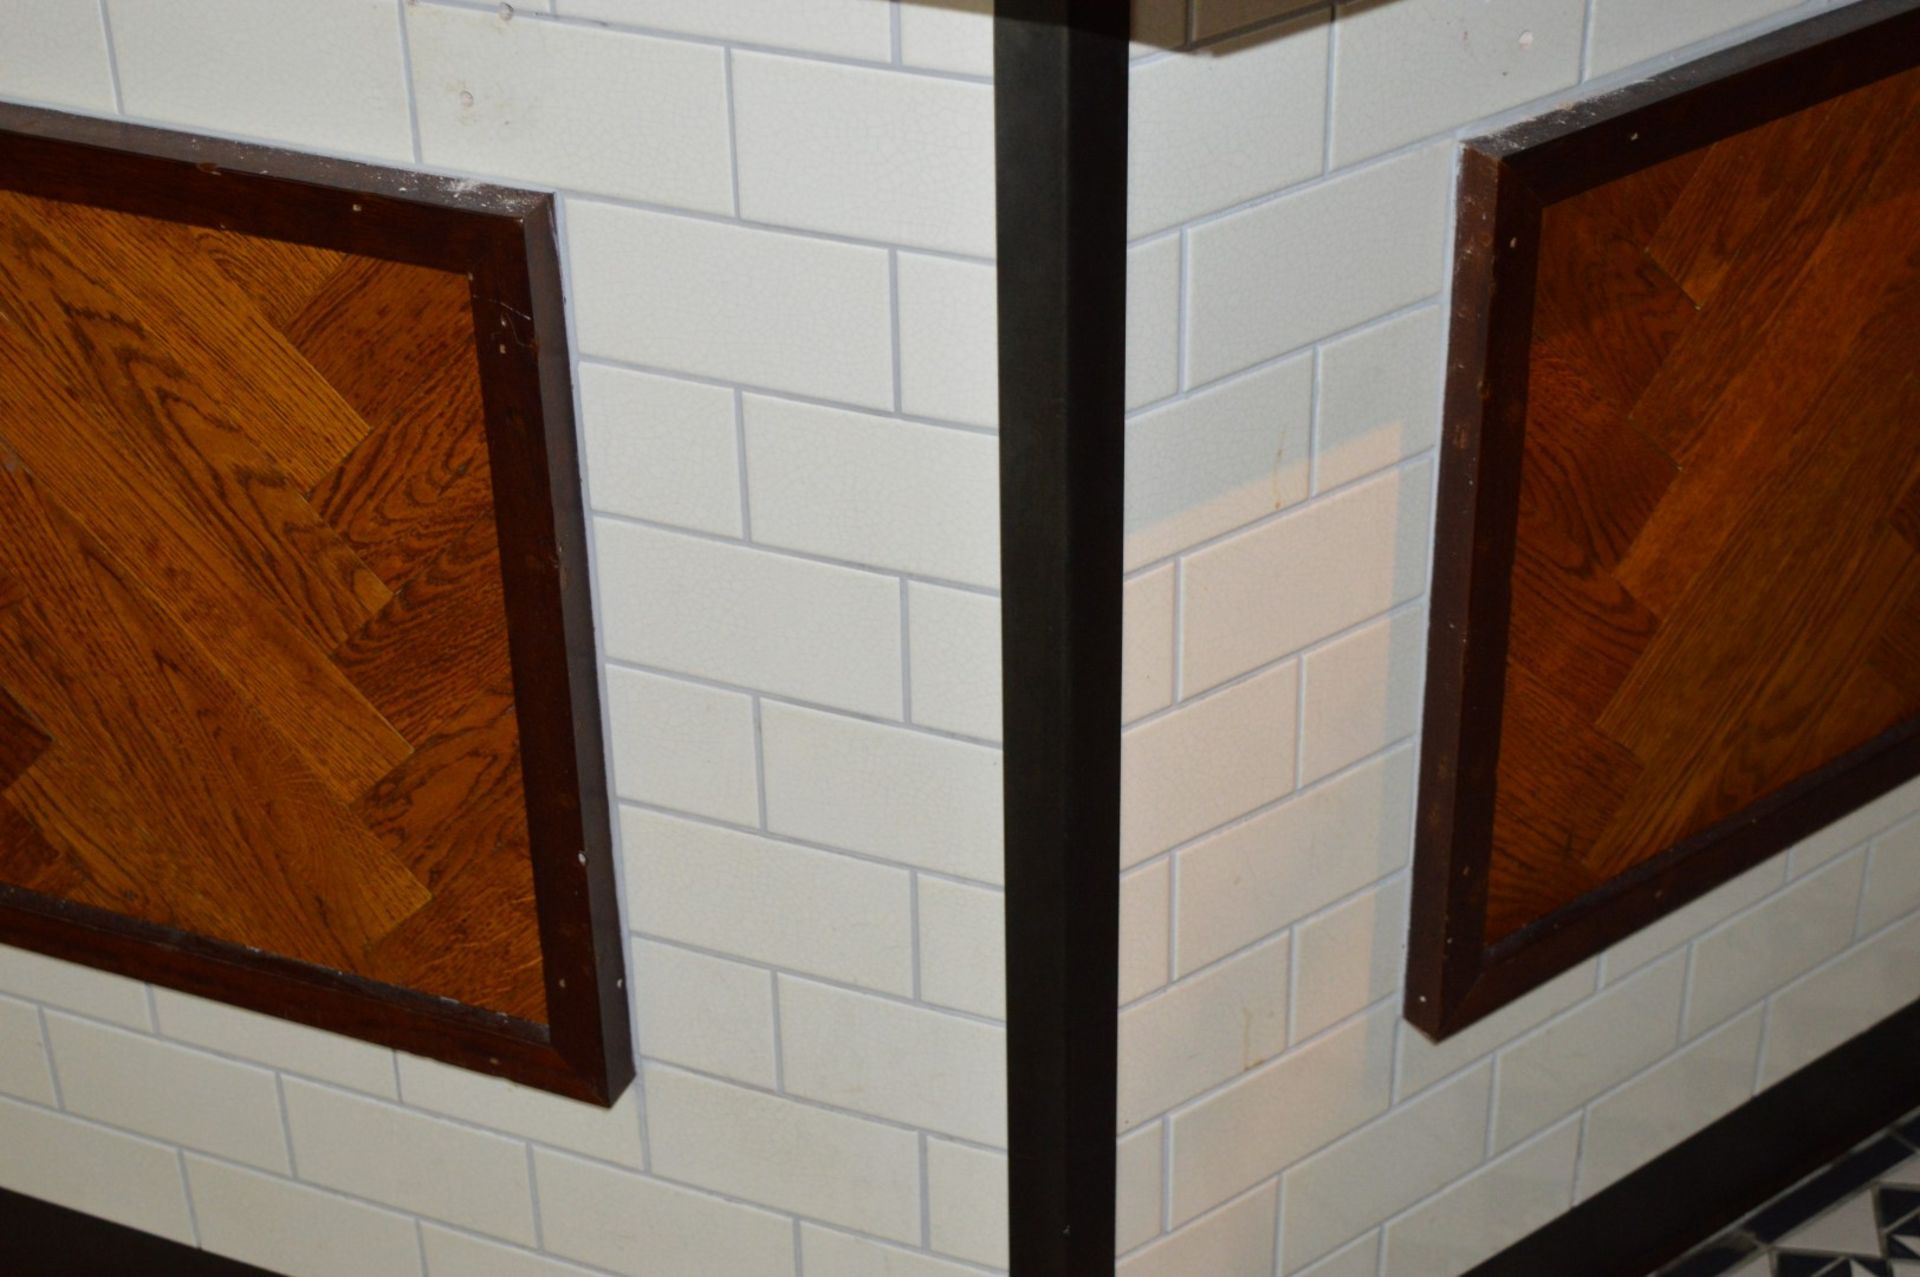 1 x Large Pub / Restuarant Bar With Tiled Front and Framed Parquet Flooring Design - Also Includes - Image 24 of 25